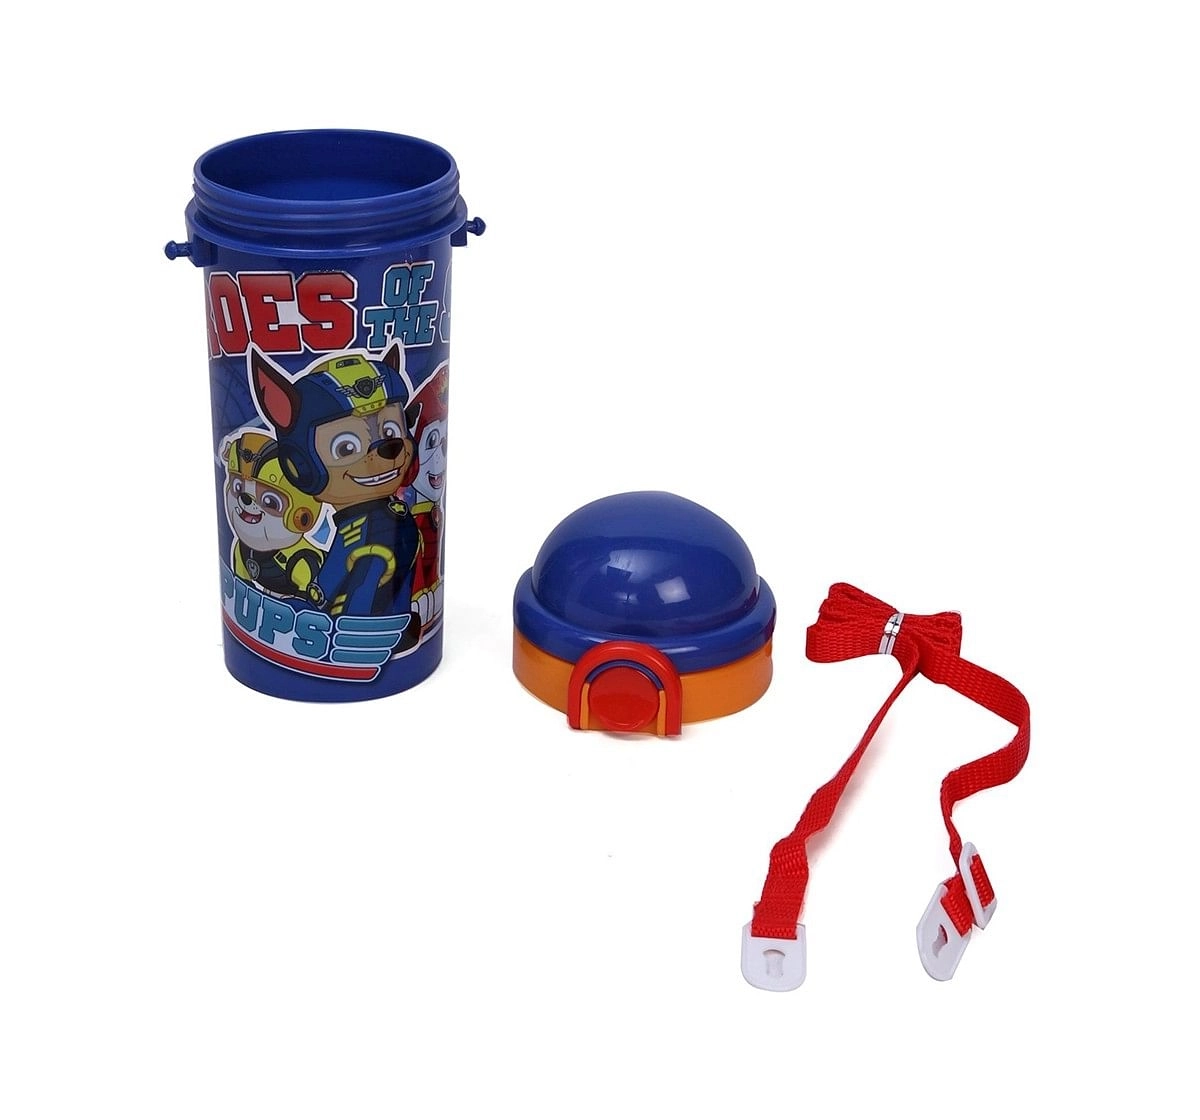 Paw Patrol Heroes of The Sky Water Bottle 450 ml for age 3Y+  Quirky Soft Toys for Kids age 3Y+ - 18.2 Cm 